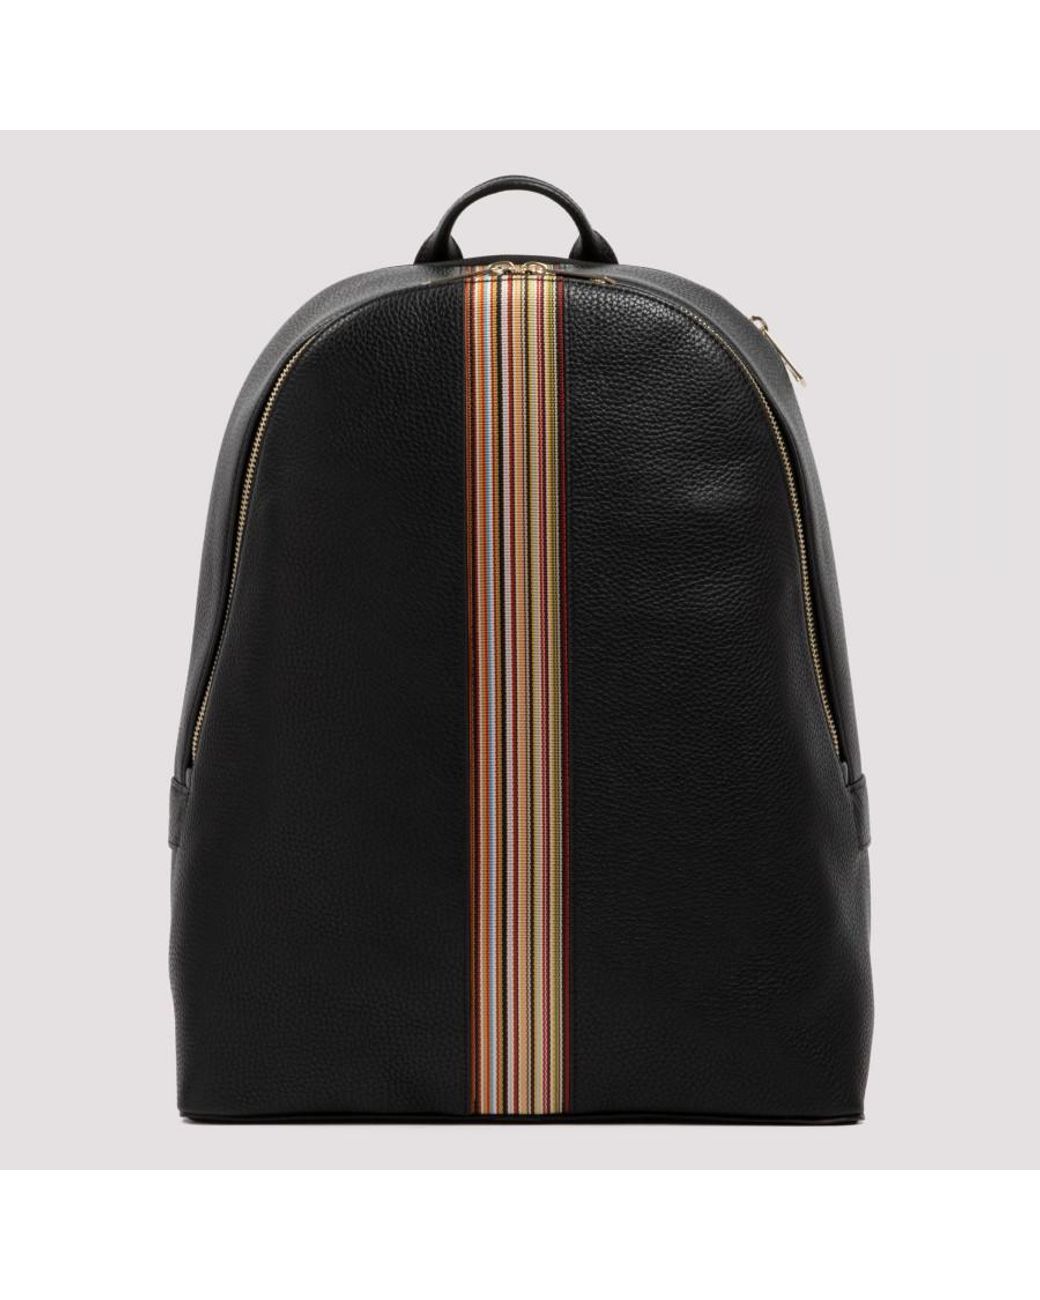 Paul Smith Signature Stripe Backpack in Black for Men - Save 65% - Lyst